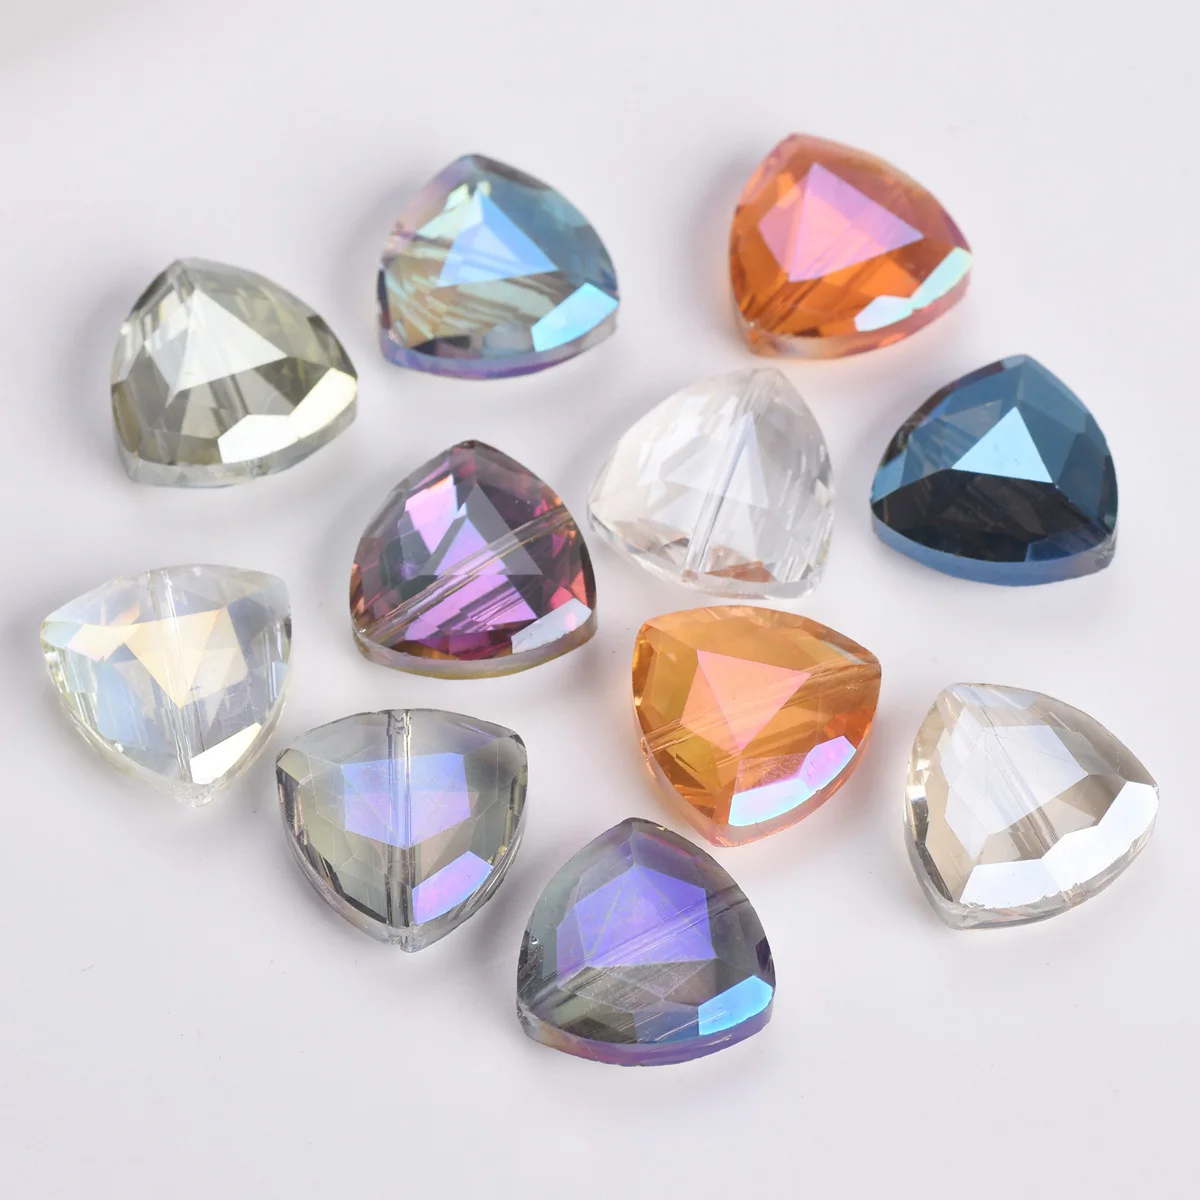 10pcs 18mm Colorful Triangle Faceted Crystal Glass Loose Beads for Jewelry Making DIY Crafts Findings